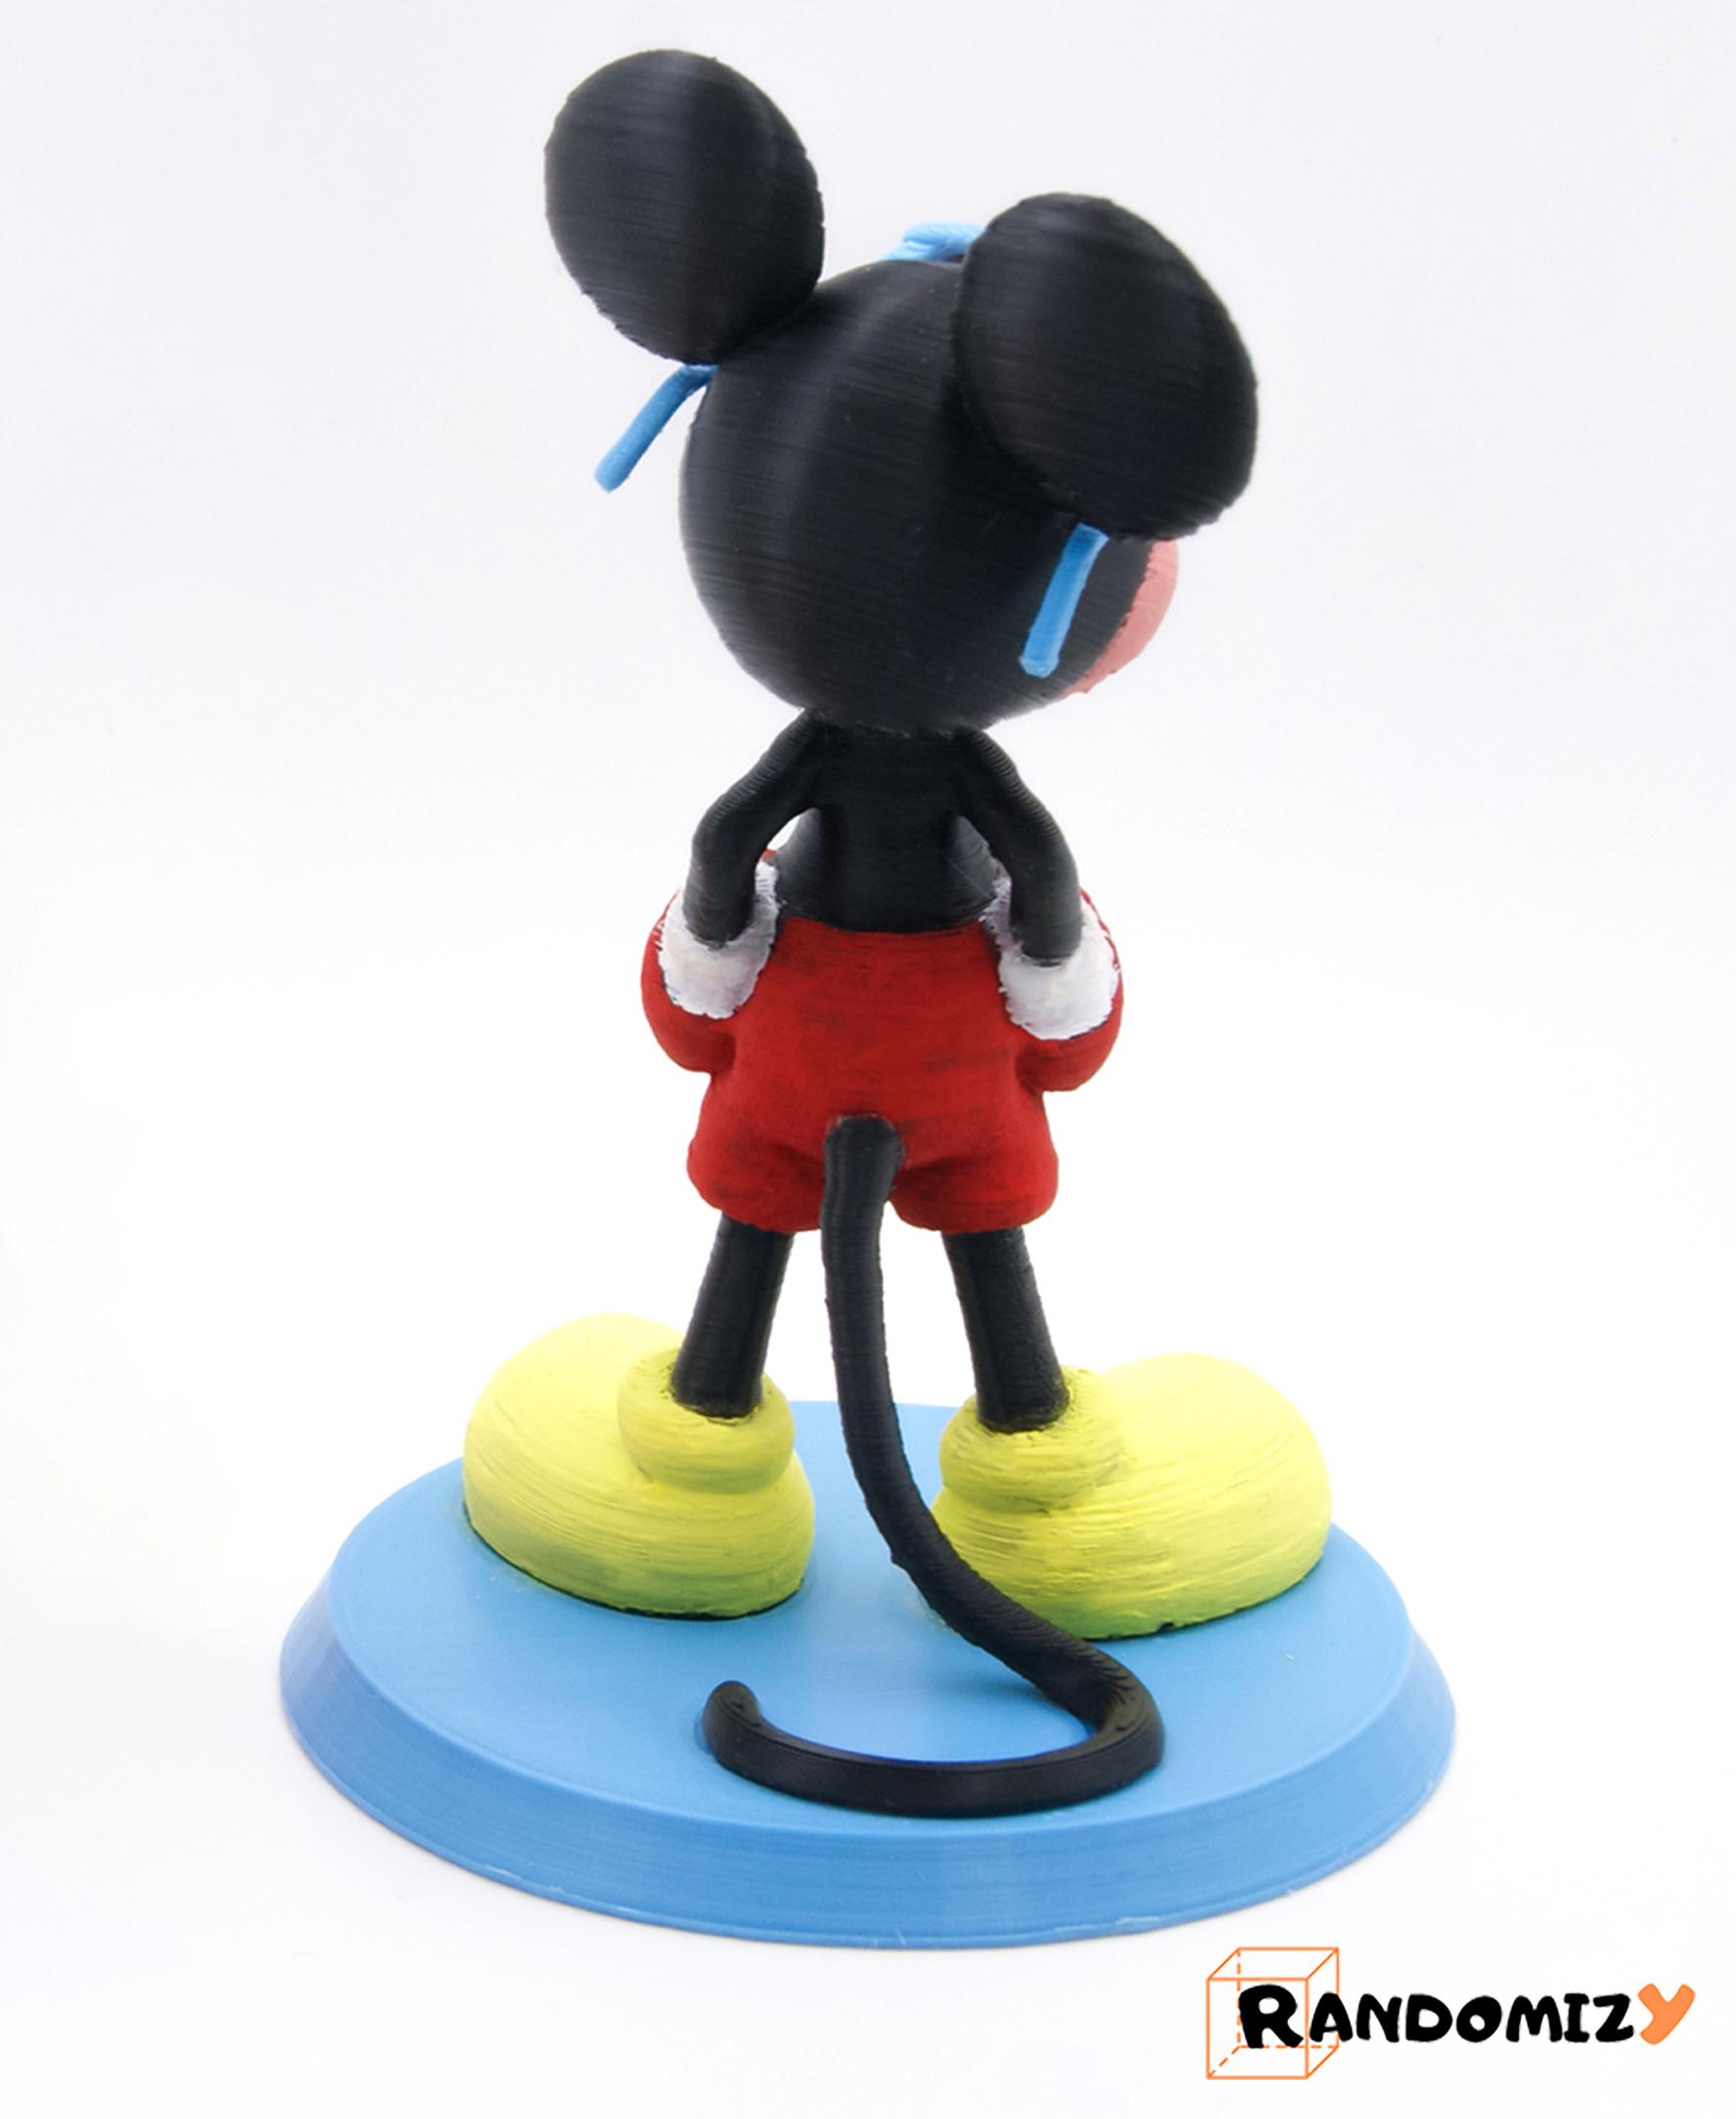 Mickey Mouse - Chill Vibes With Sunglasses (Fanart) 3d model